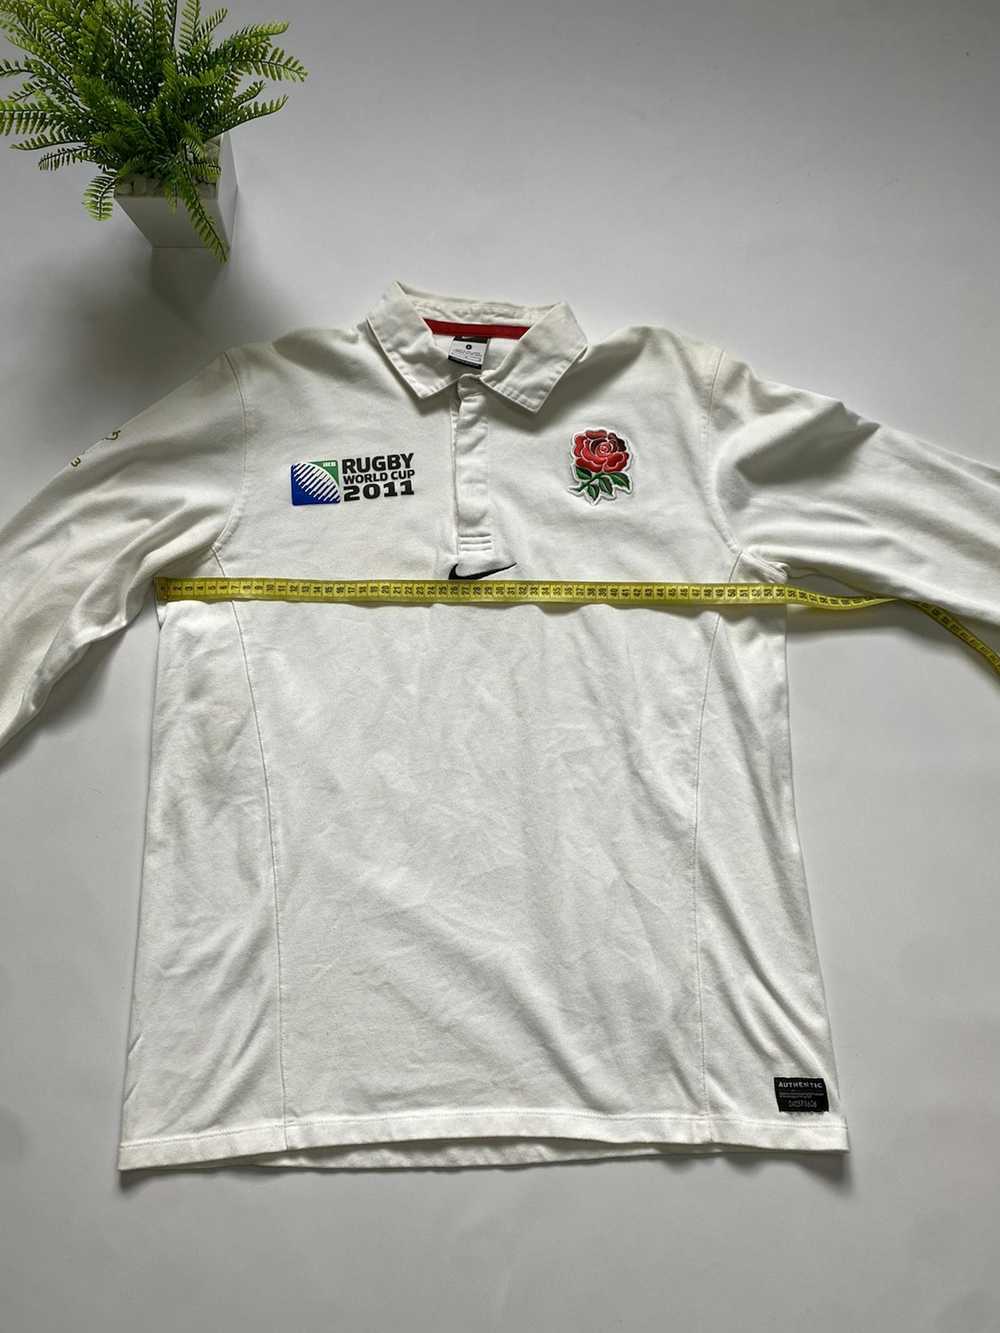 England Rugby League × Nike × Vintage Nike Rugby … - image 12